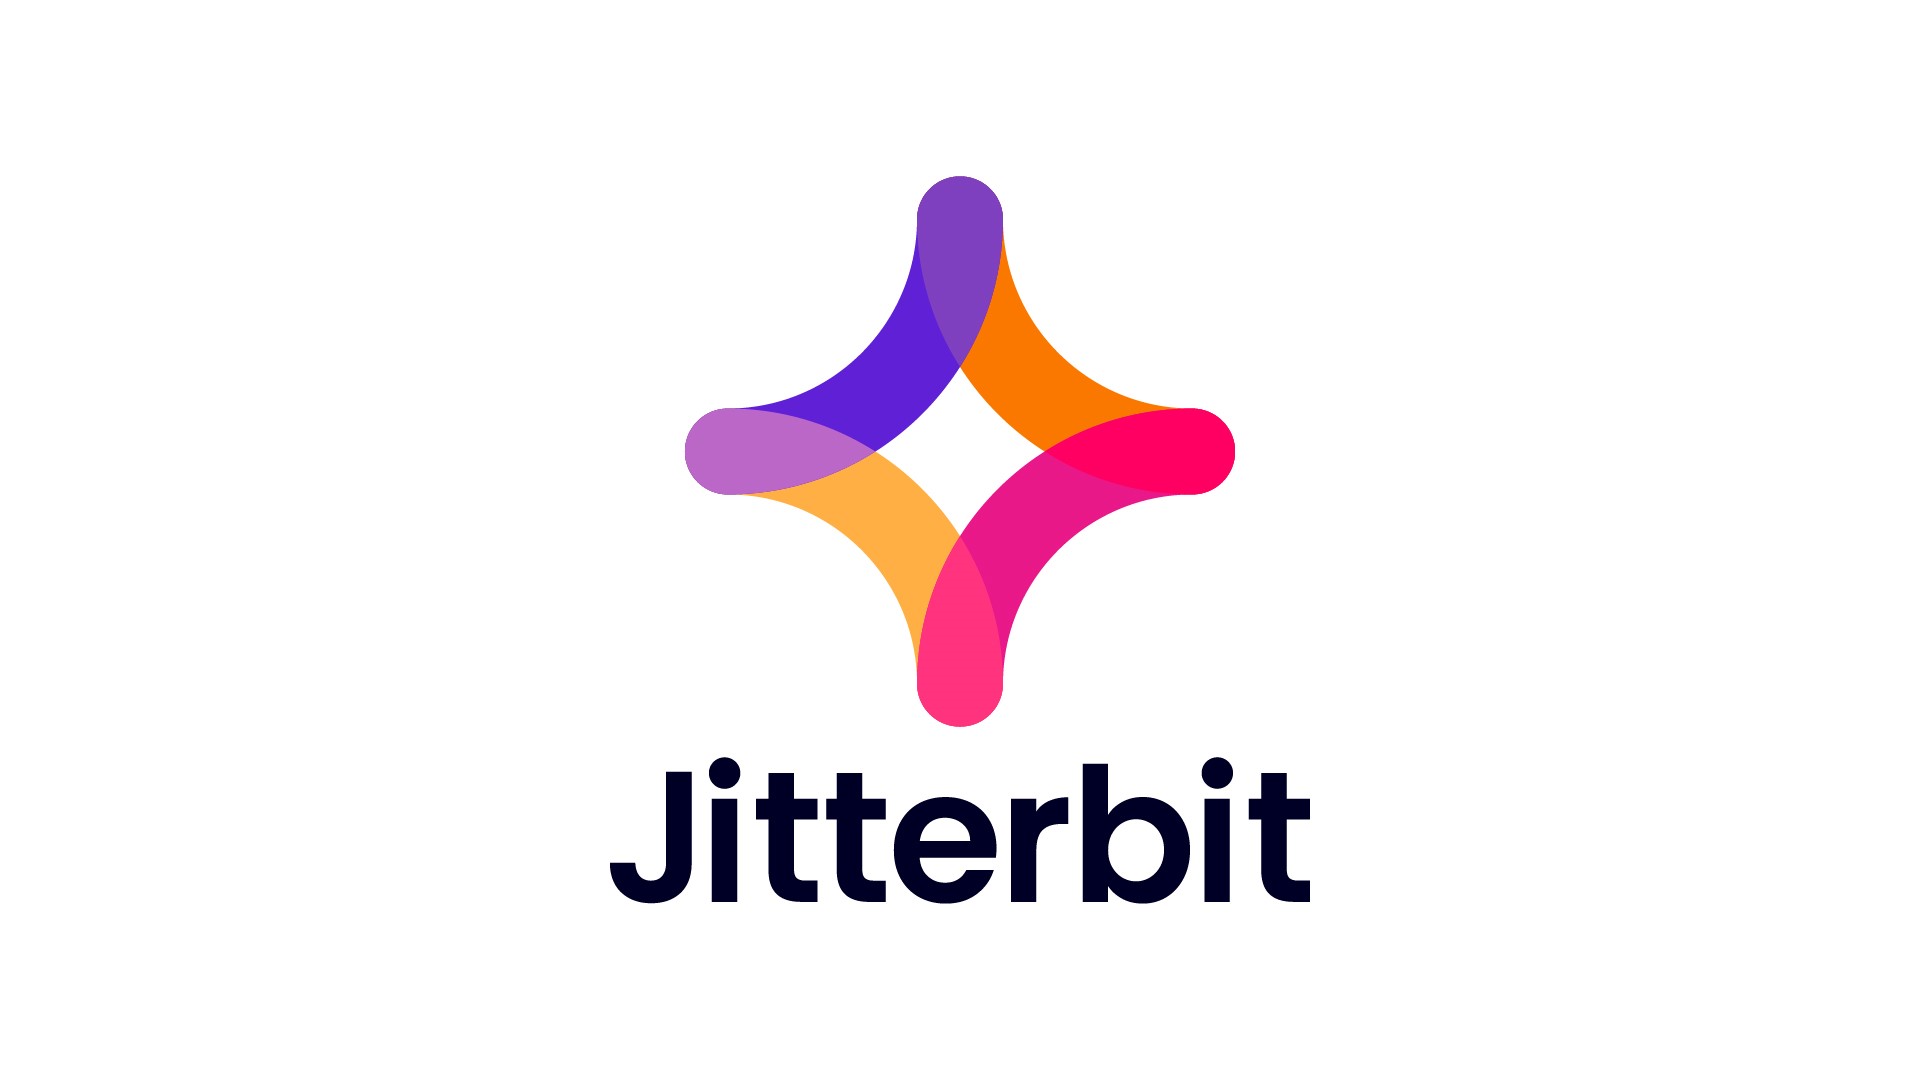 Jitterbit Survey Reveals Only One-Third of IT Executives Believe they Outpace Competitors in Automation Initiatives